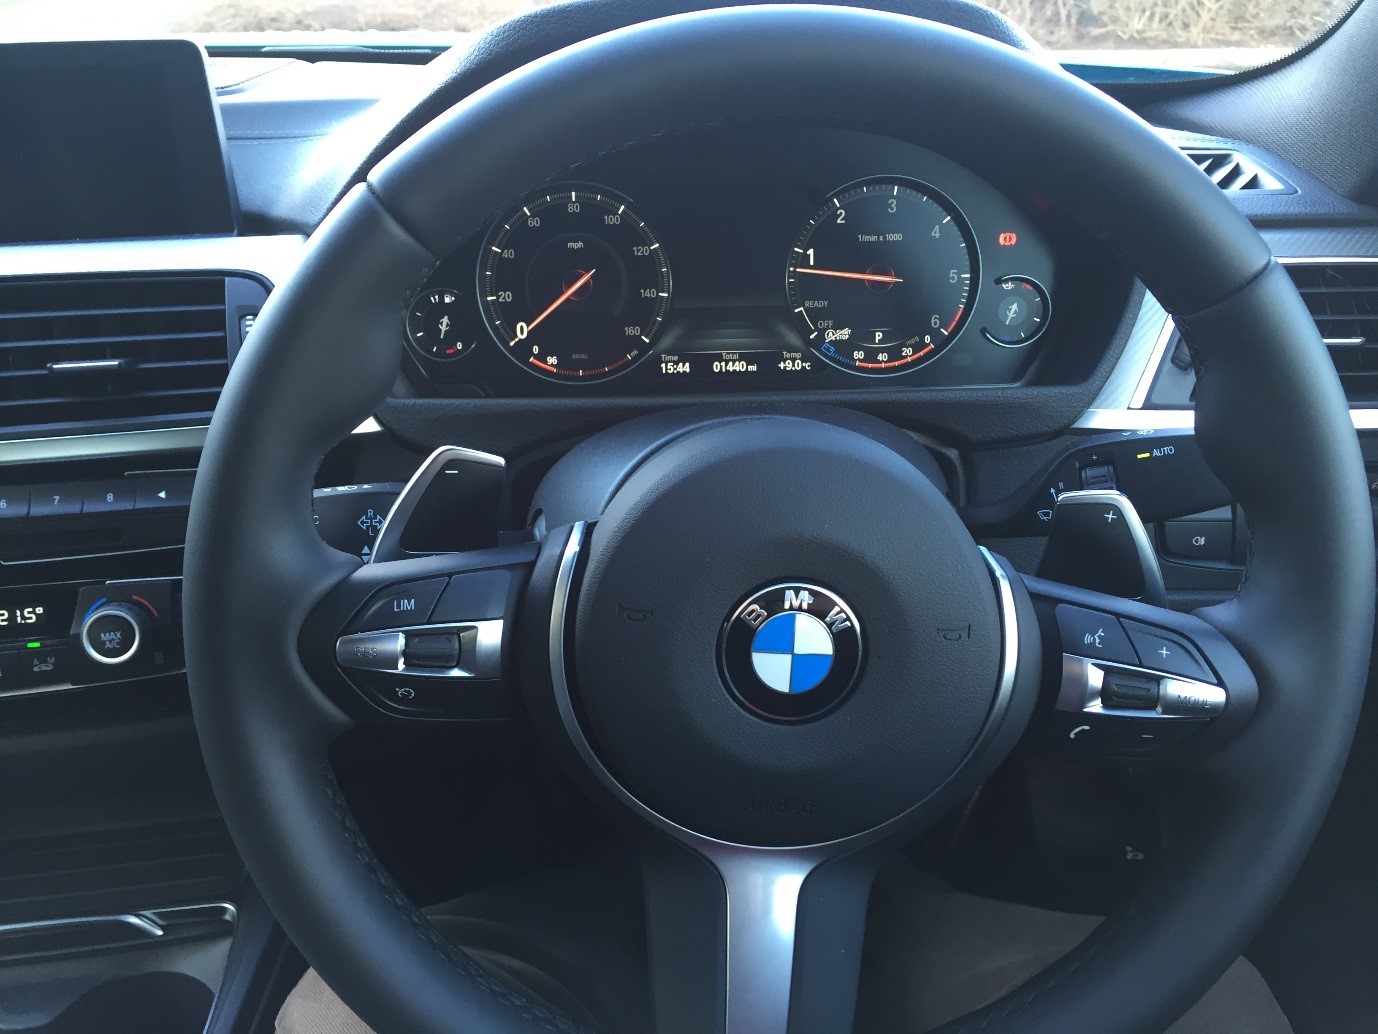 Vehicle Insight A Week With The Bmw 430d Xdrive M Sport Coupe Autovista Group